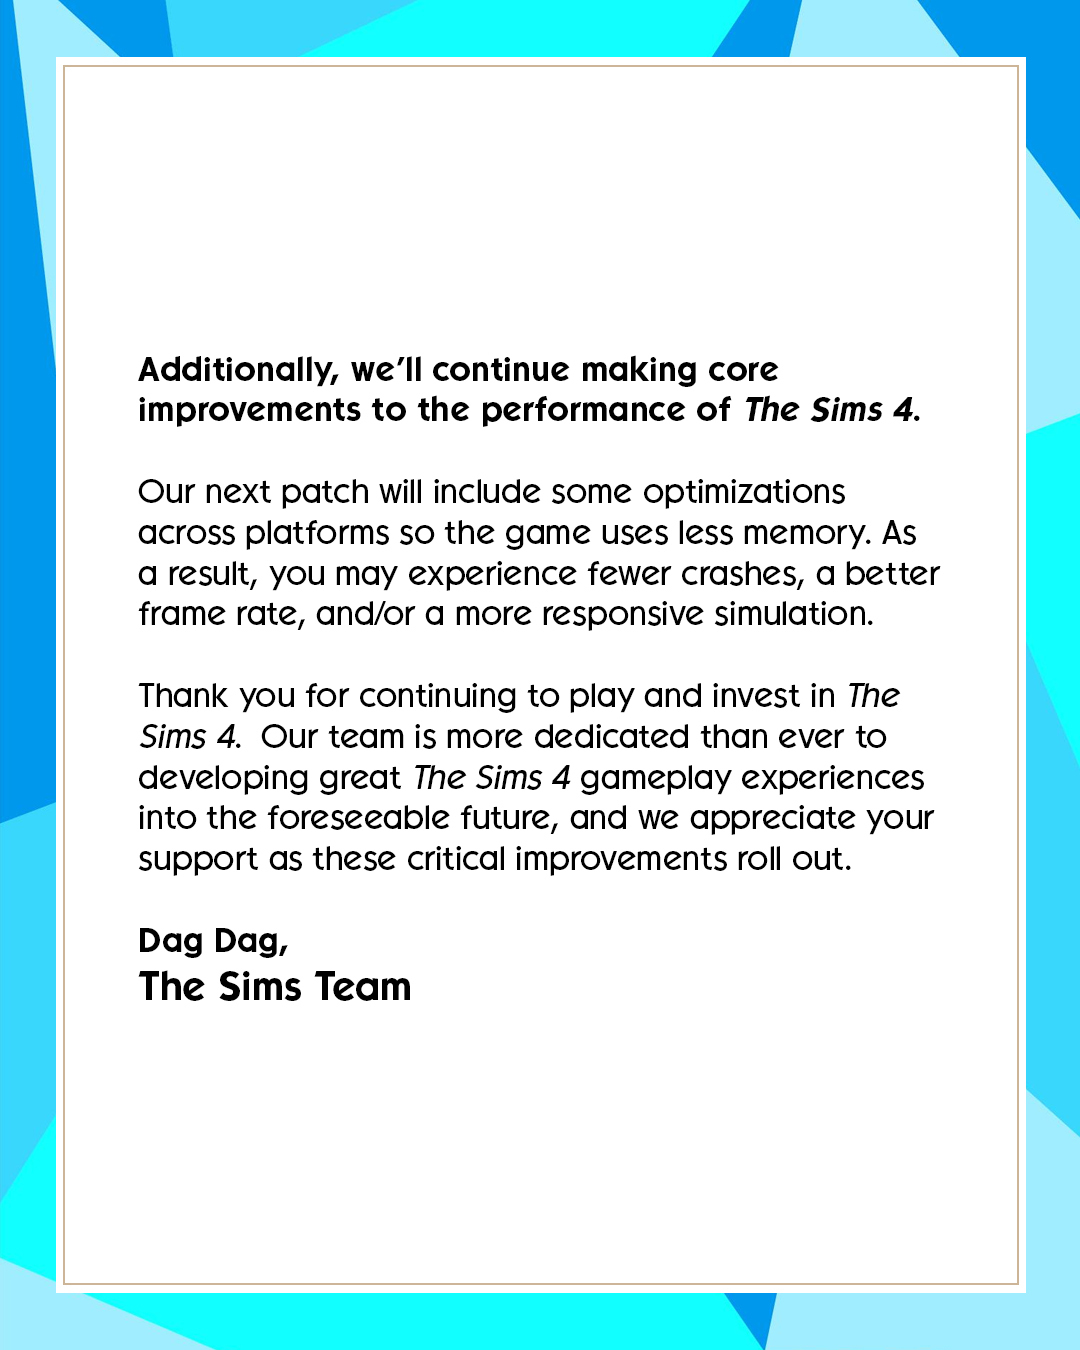 A statement from The Sims Twitter account regarding assembling a team to fix bugs.